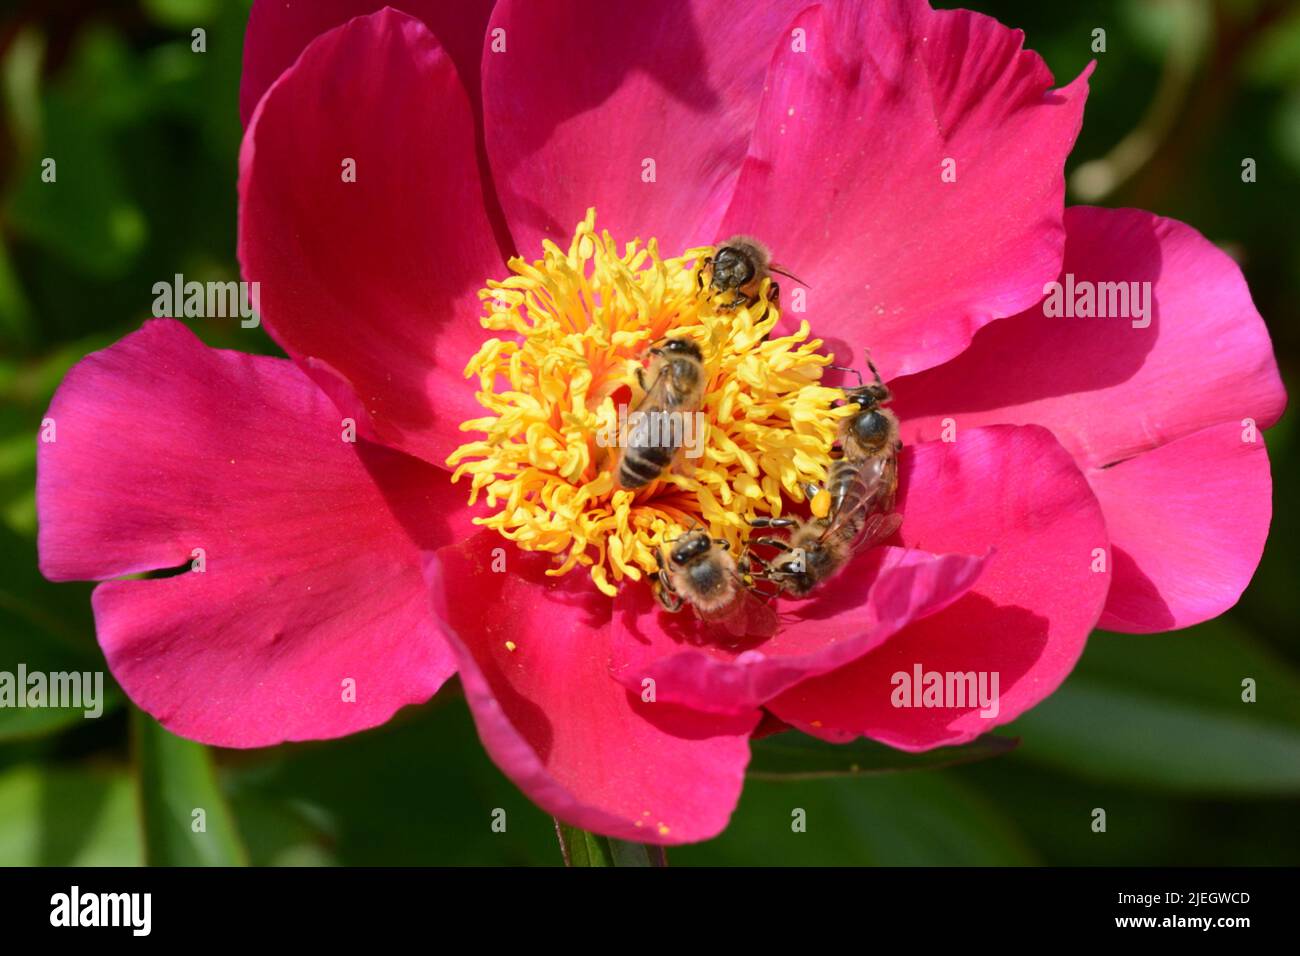 Honey bees foraging on Paeonia lactiflora Mistral Mistral peony flower Stock Photo